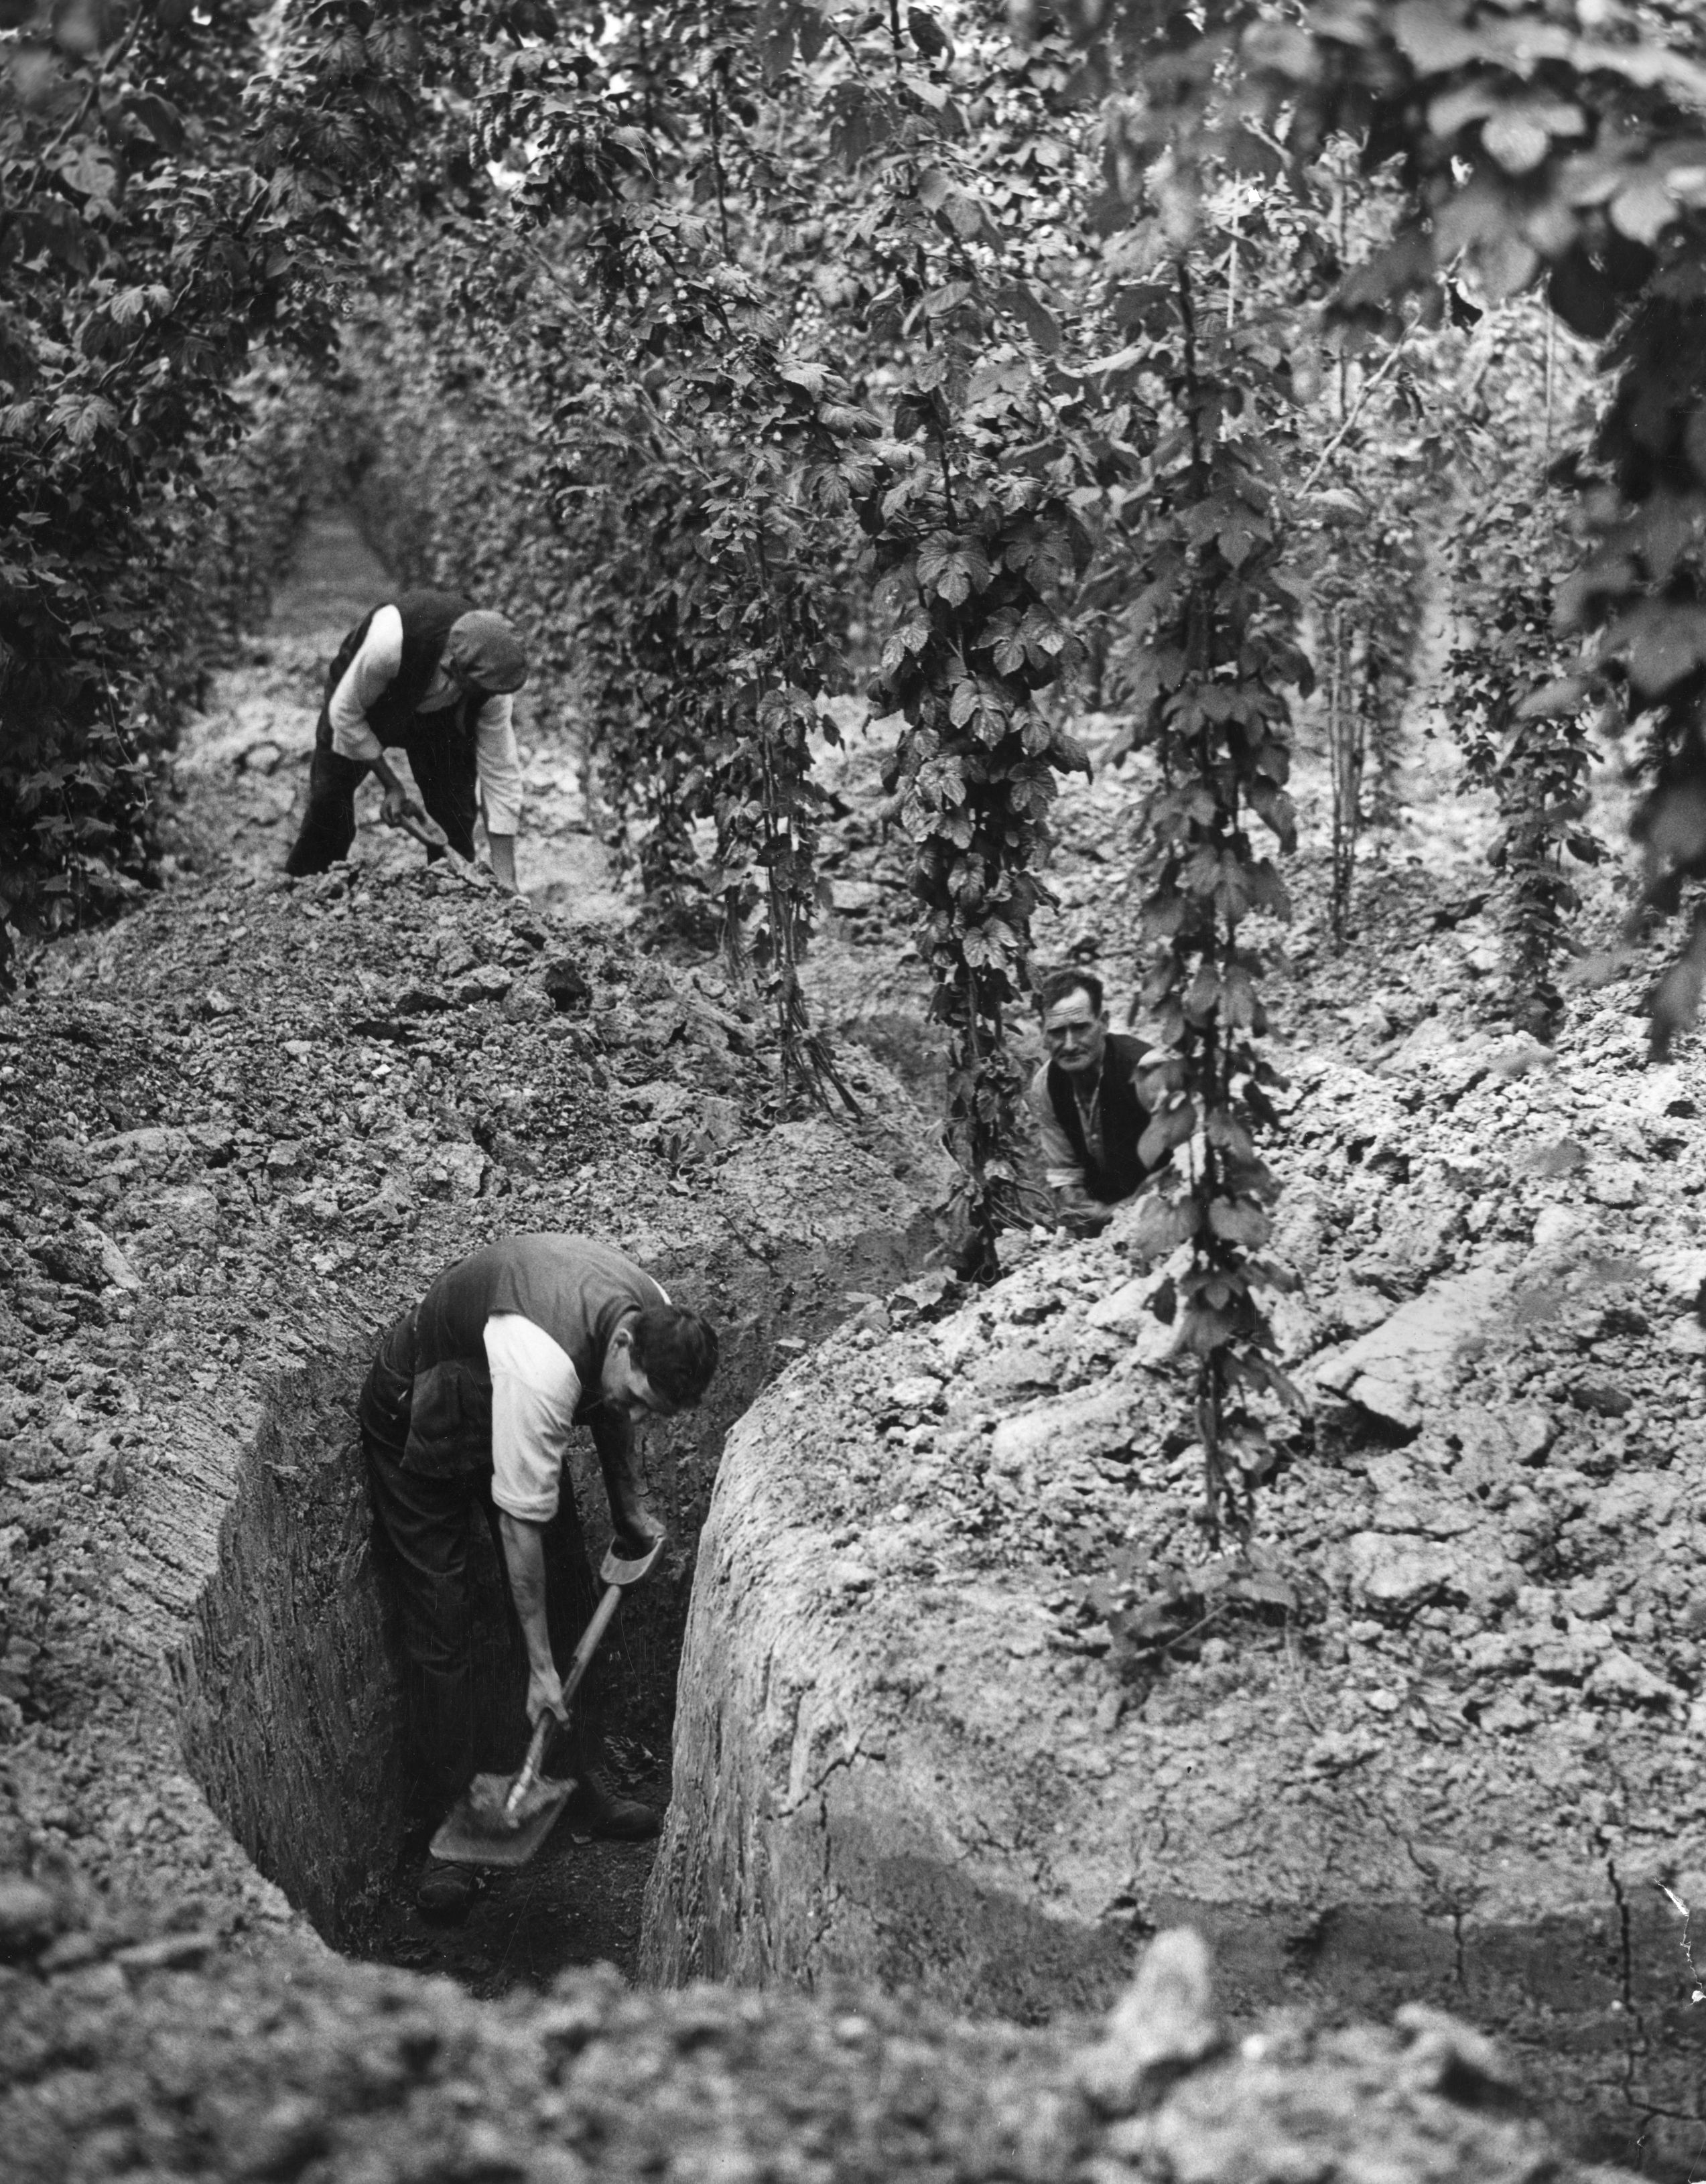 Men digging trenches to be used as air raid shelters during World War II